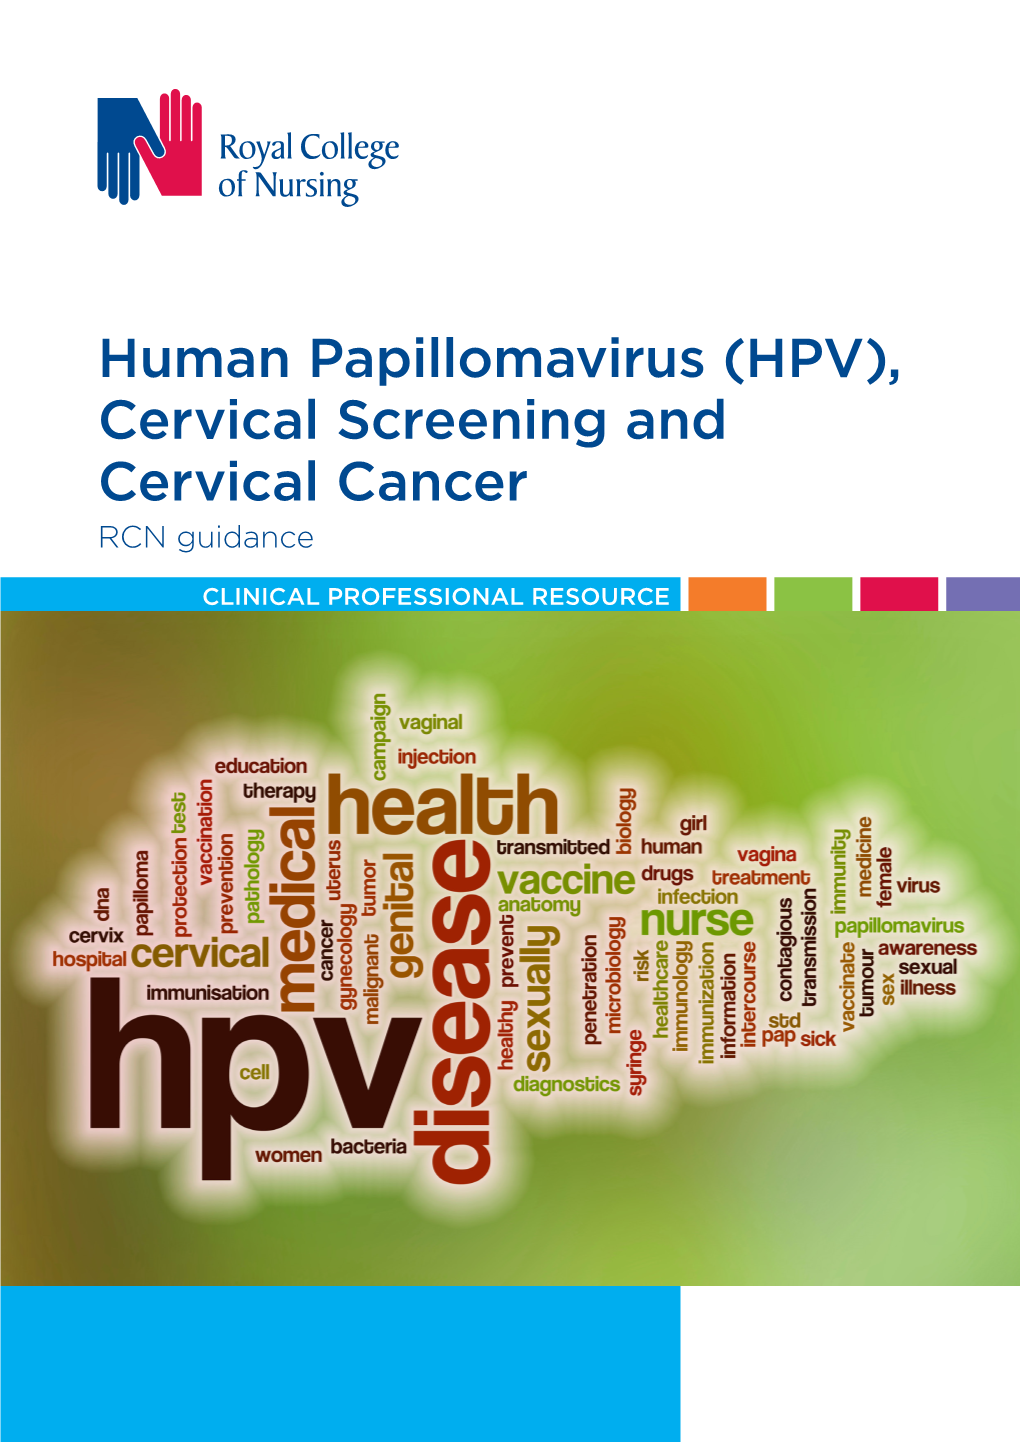 Human Papillomavirus (HPV), Cervical Screening and Cervical Cancer RCN Guidance